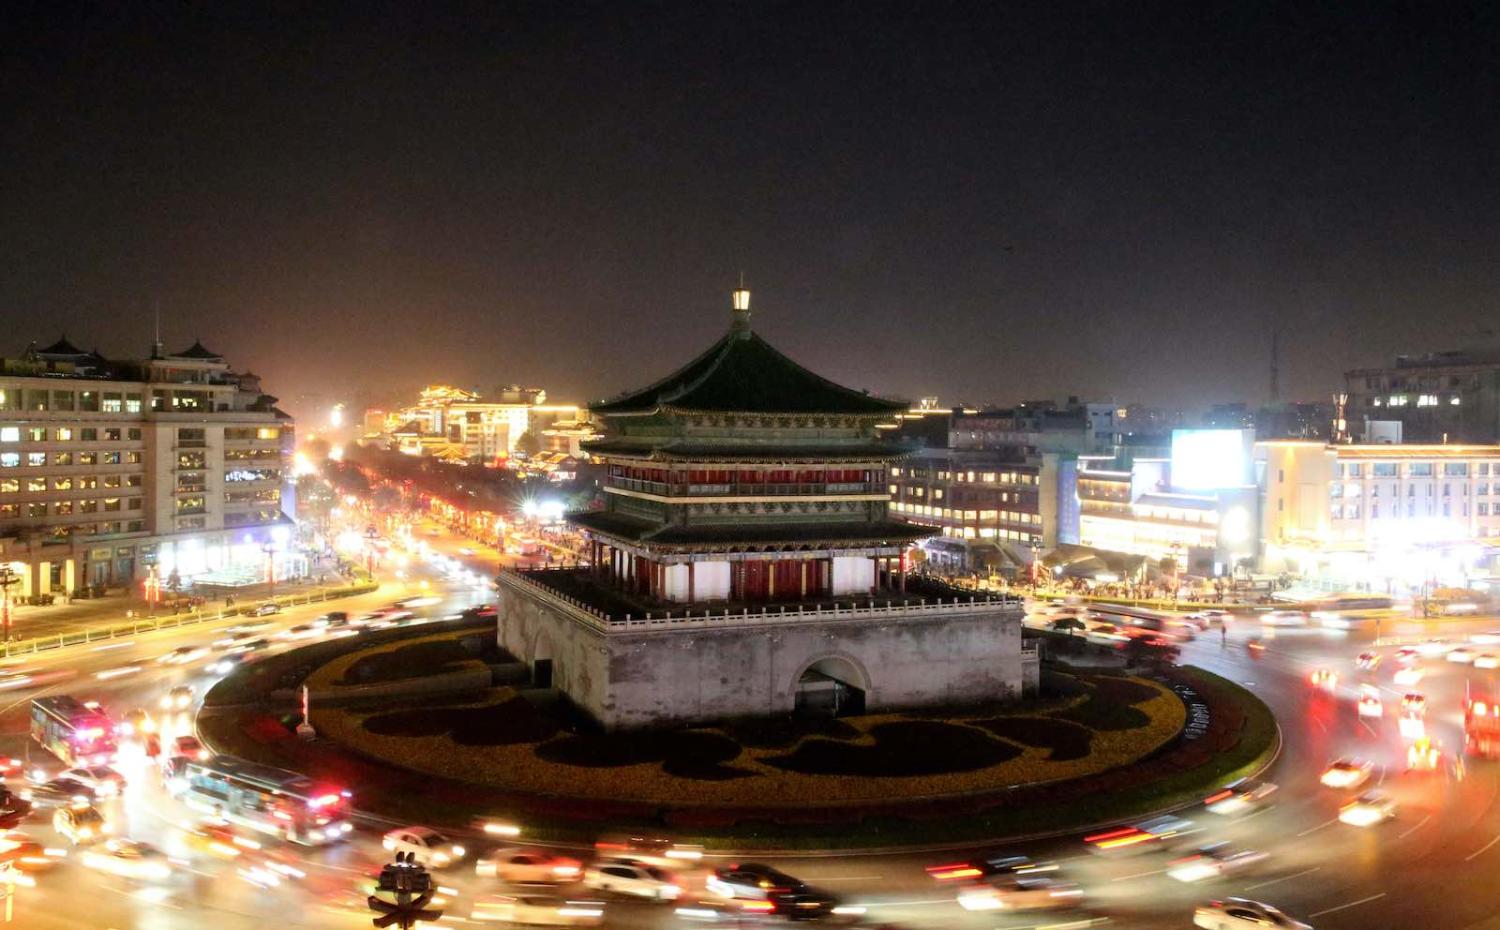 The Xi’an Bell Tower, Xi’an, Shaanxi Province, China, with the lights off during Earth Hour 2021 on 27 March (Shang Hongtao/VCG via Getty Images)